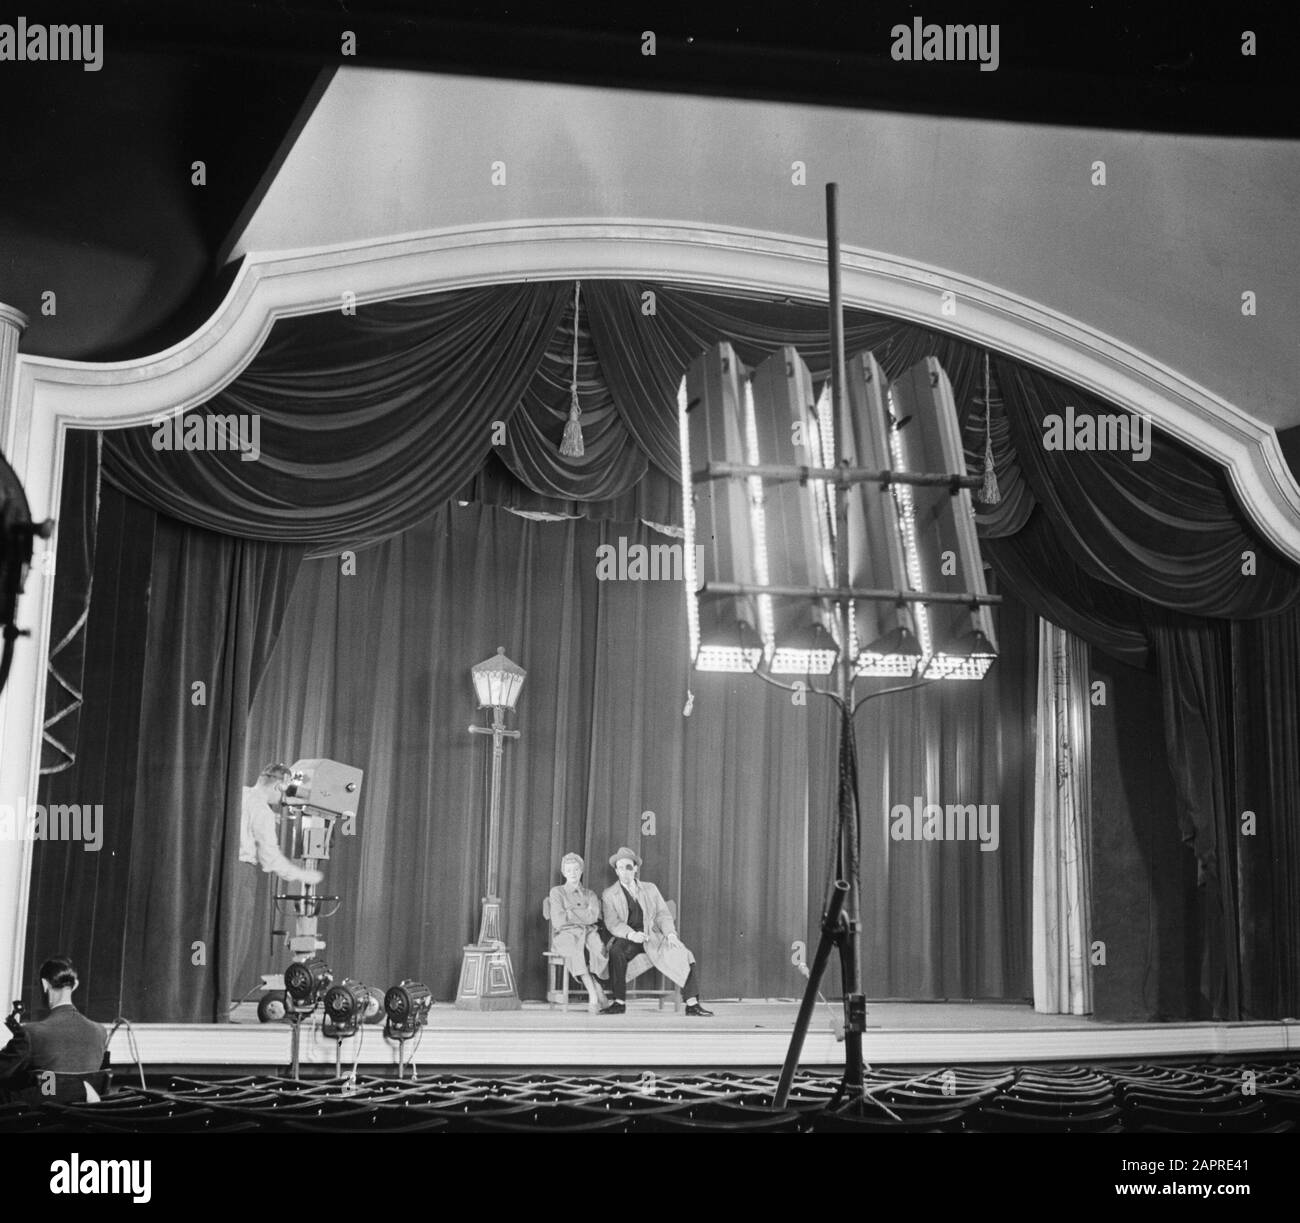 VARA television. Cabaretier Wim Sonneveld in his program Girl with big feet Annotation: First performance in De La Mar theater Date: 27 January 1953 Location: Amsterdam, Noord-Holland Keywords: cabaret, television, theater Person name: Sonneveld, Wim Stock Photo